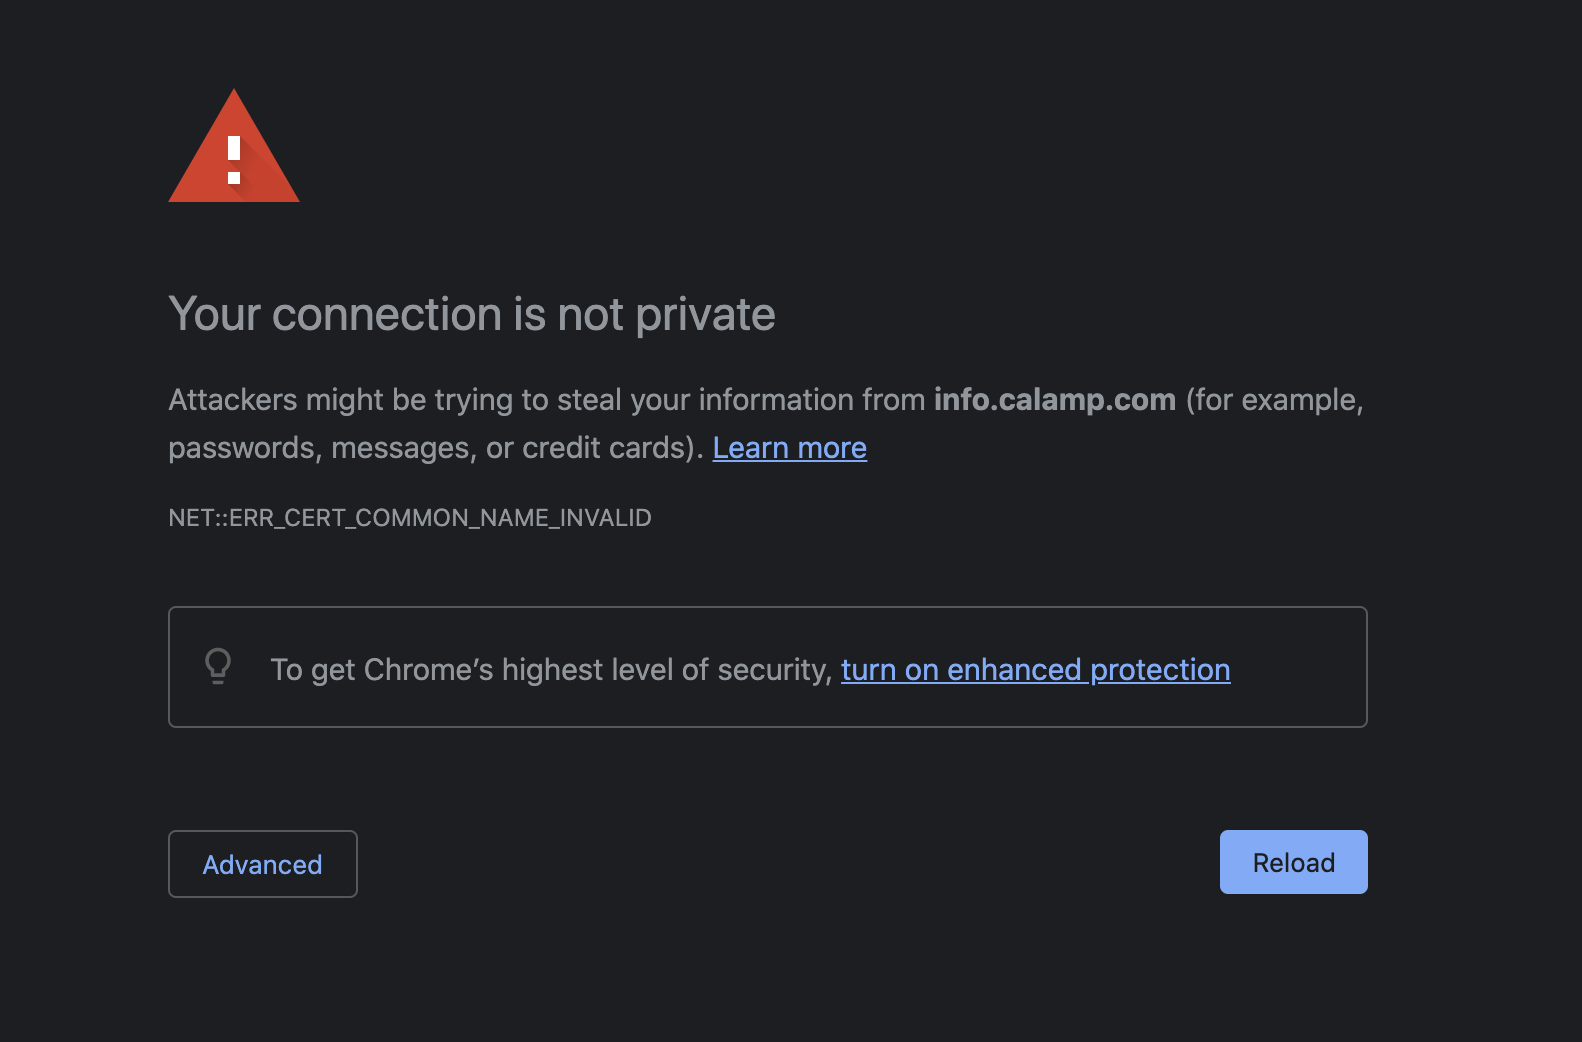 Your connection is not private.